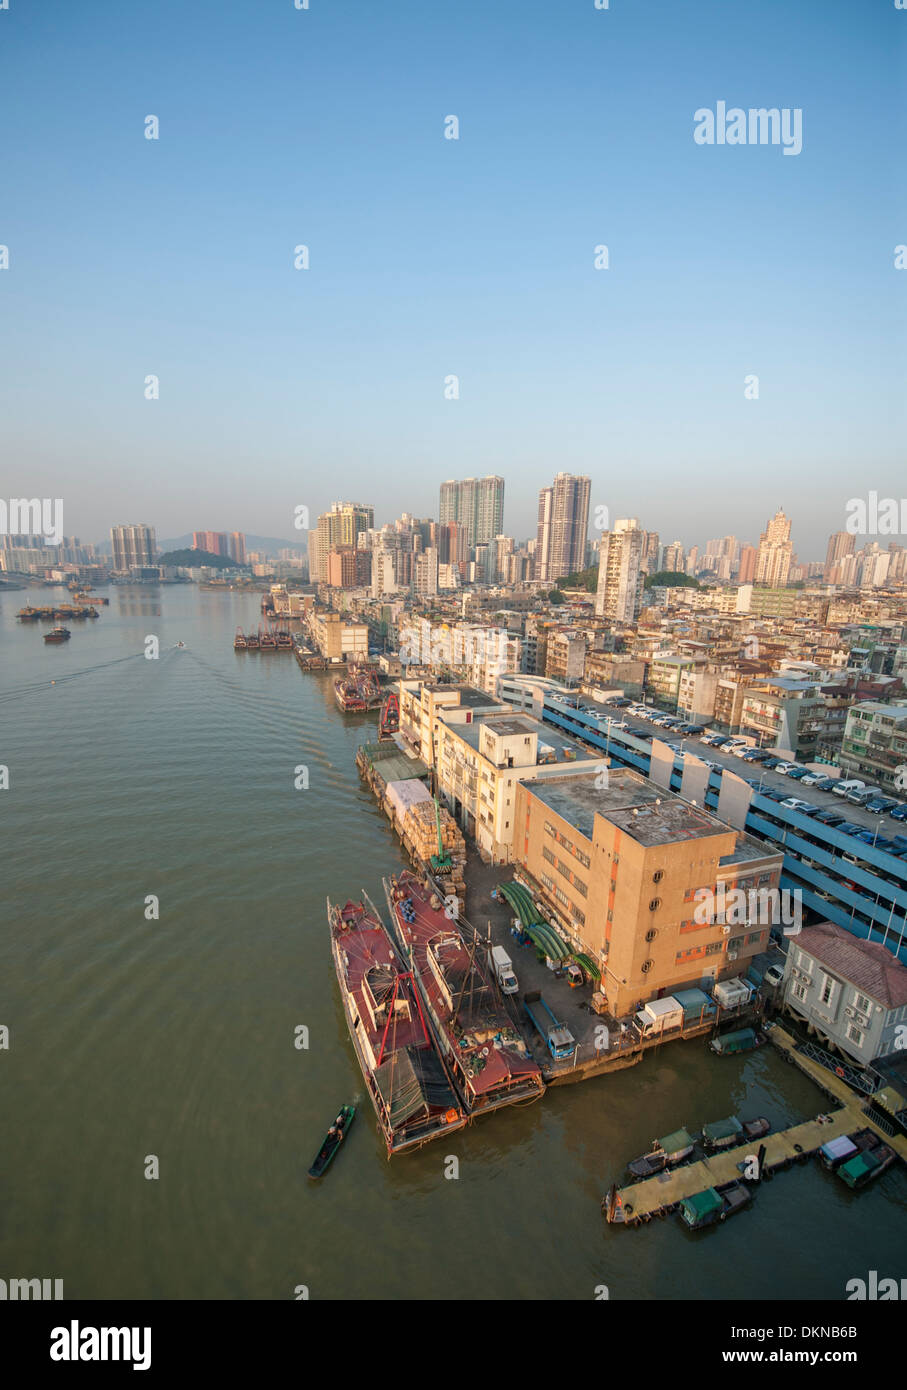 A bird's view of Macau's old inner port with quay buildings and ships plying the waterway of the SAR of China Stock Photo